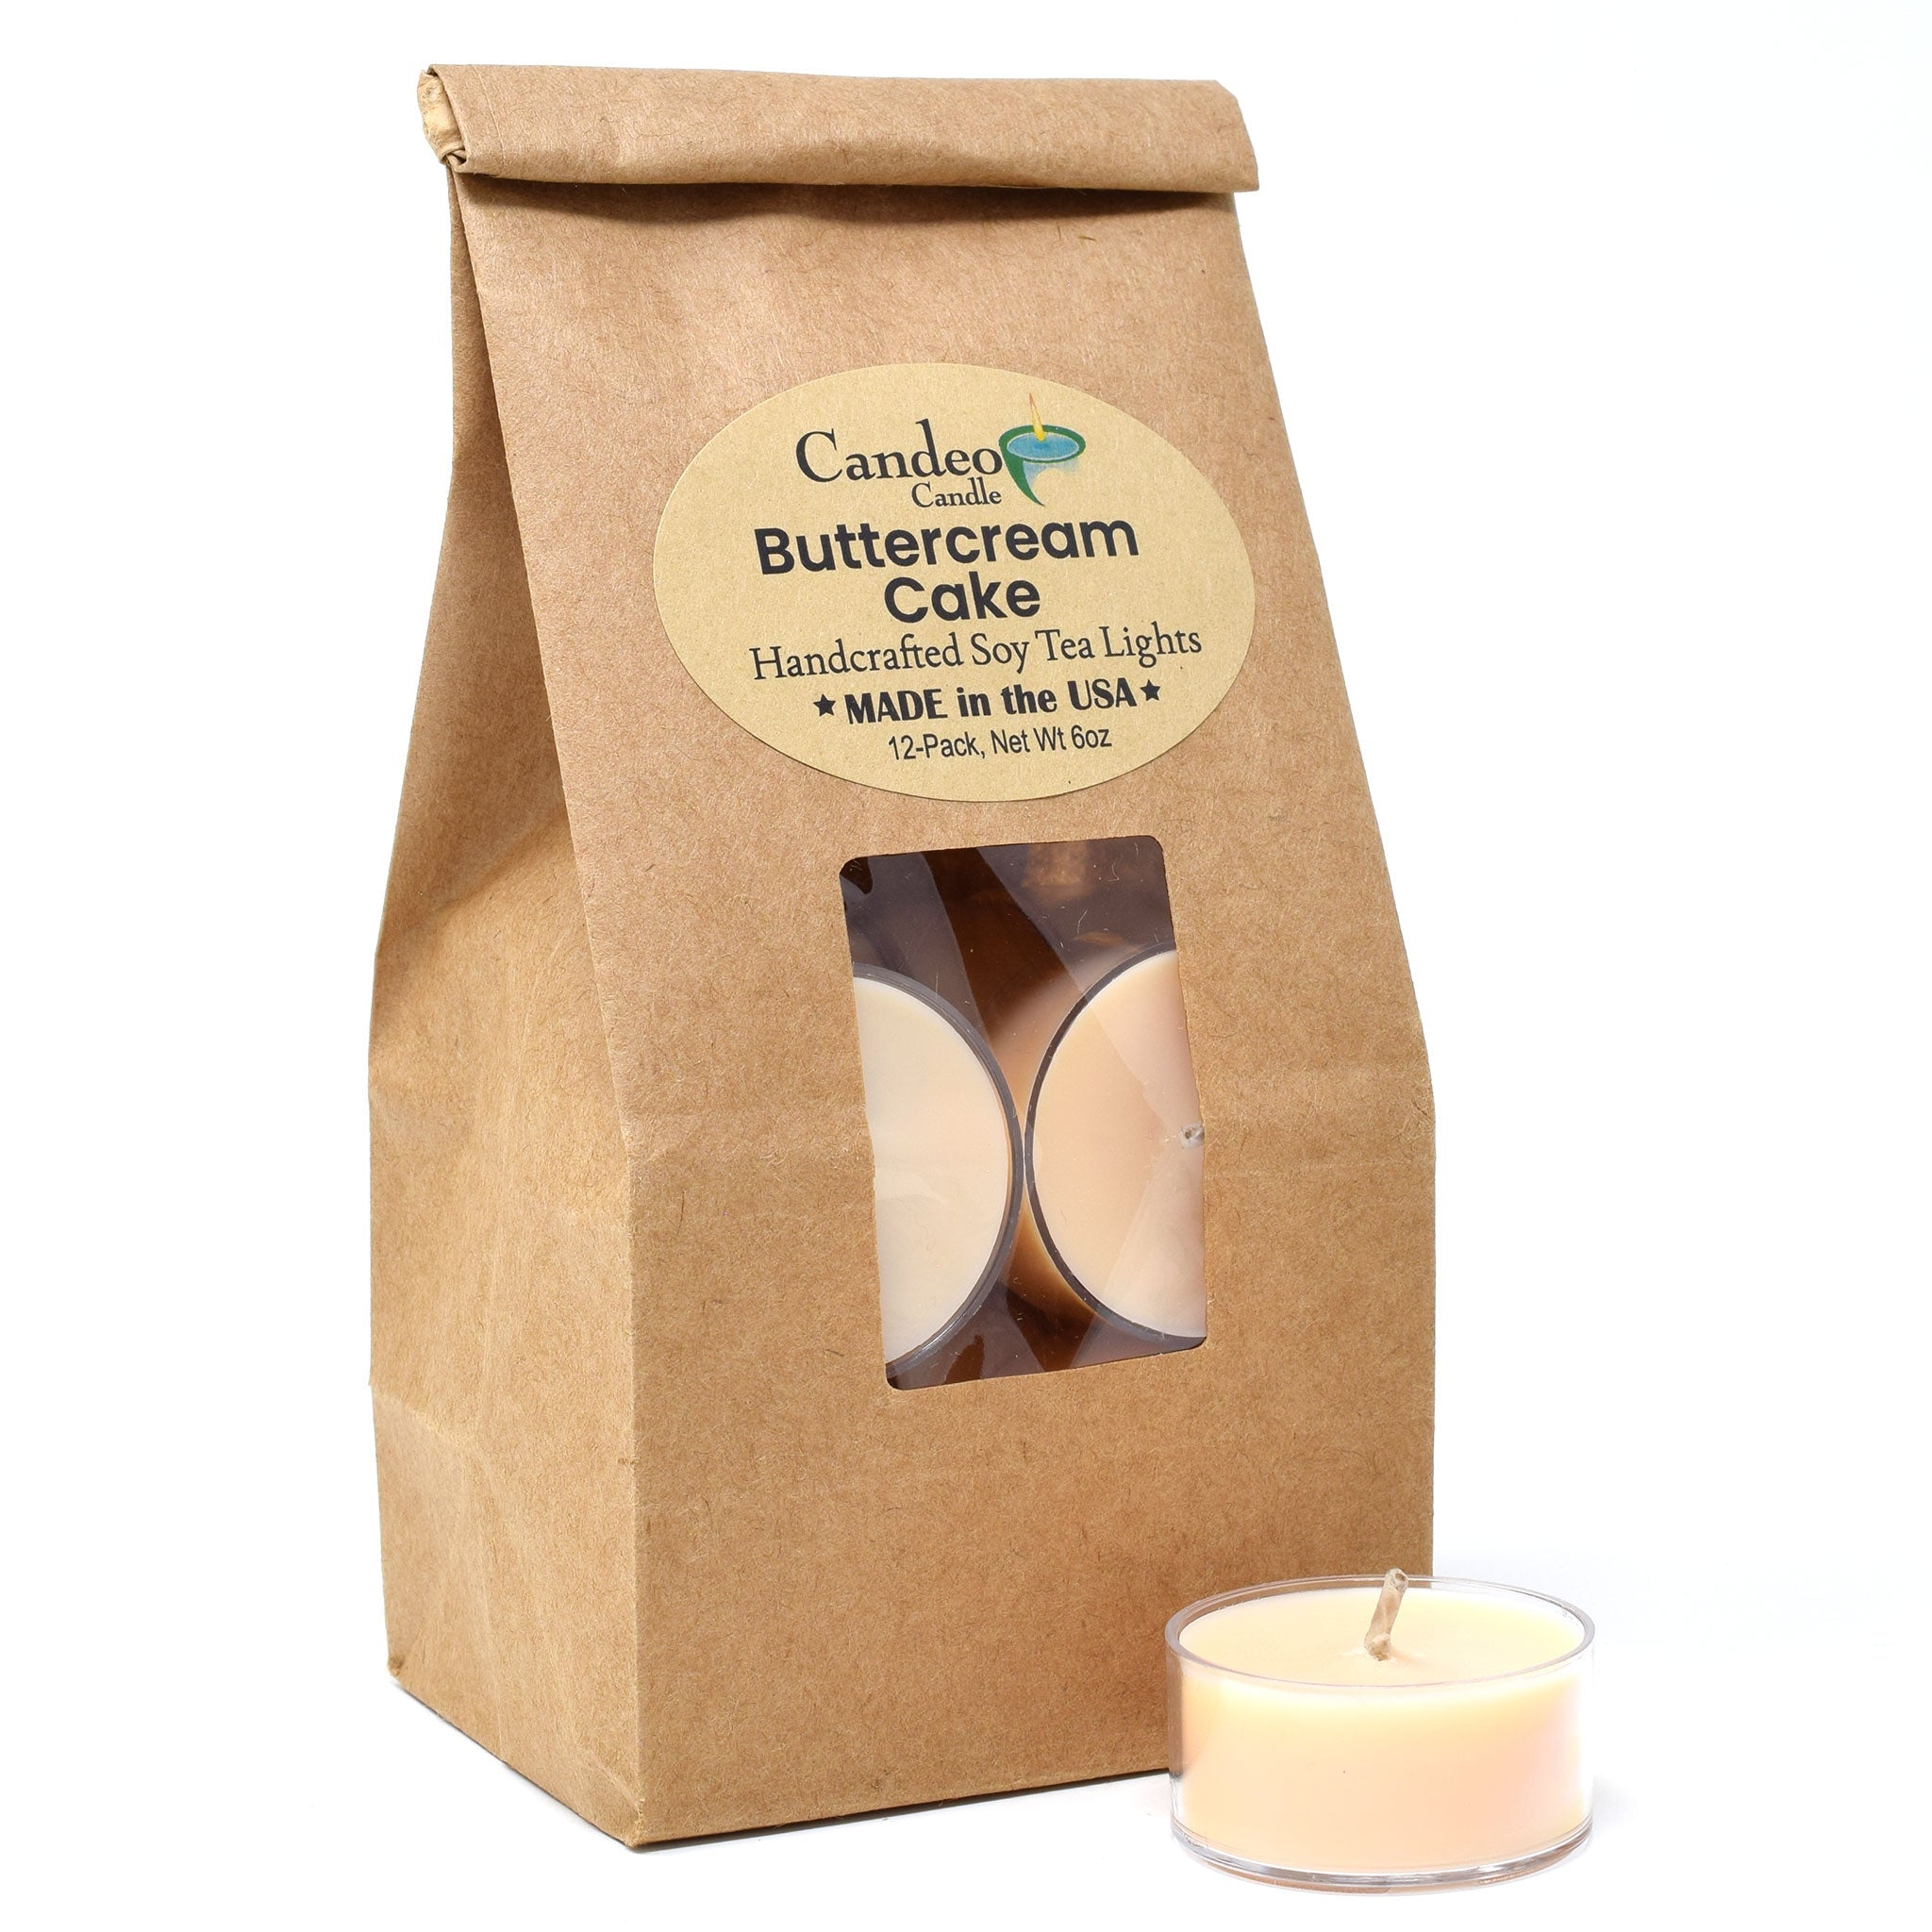 Buttercream Cake, Soy Tea Light 12-Pack - Candeo Candle